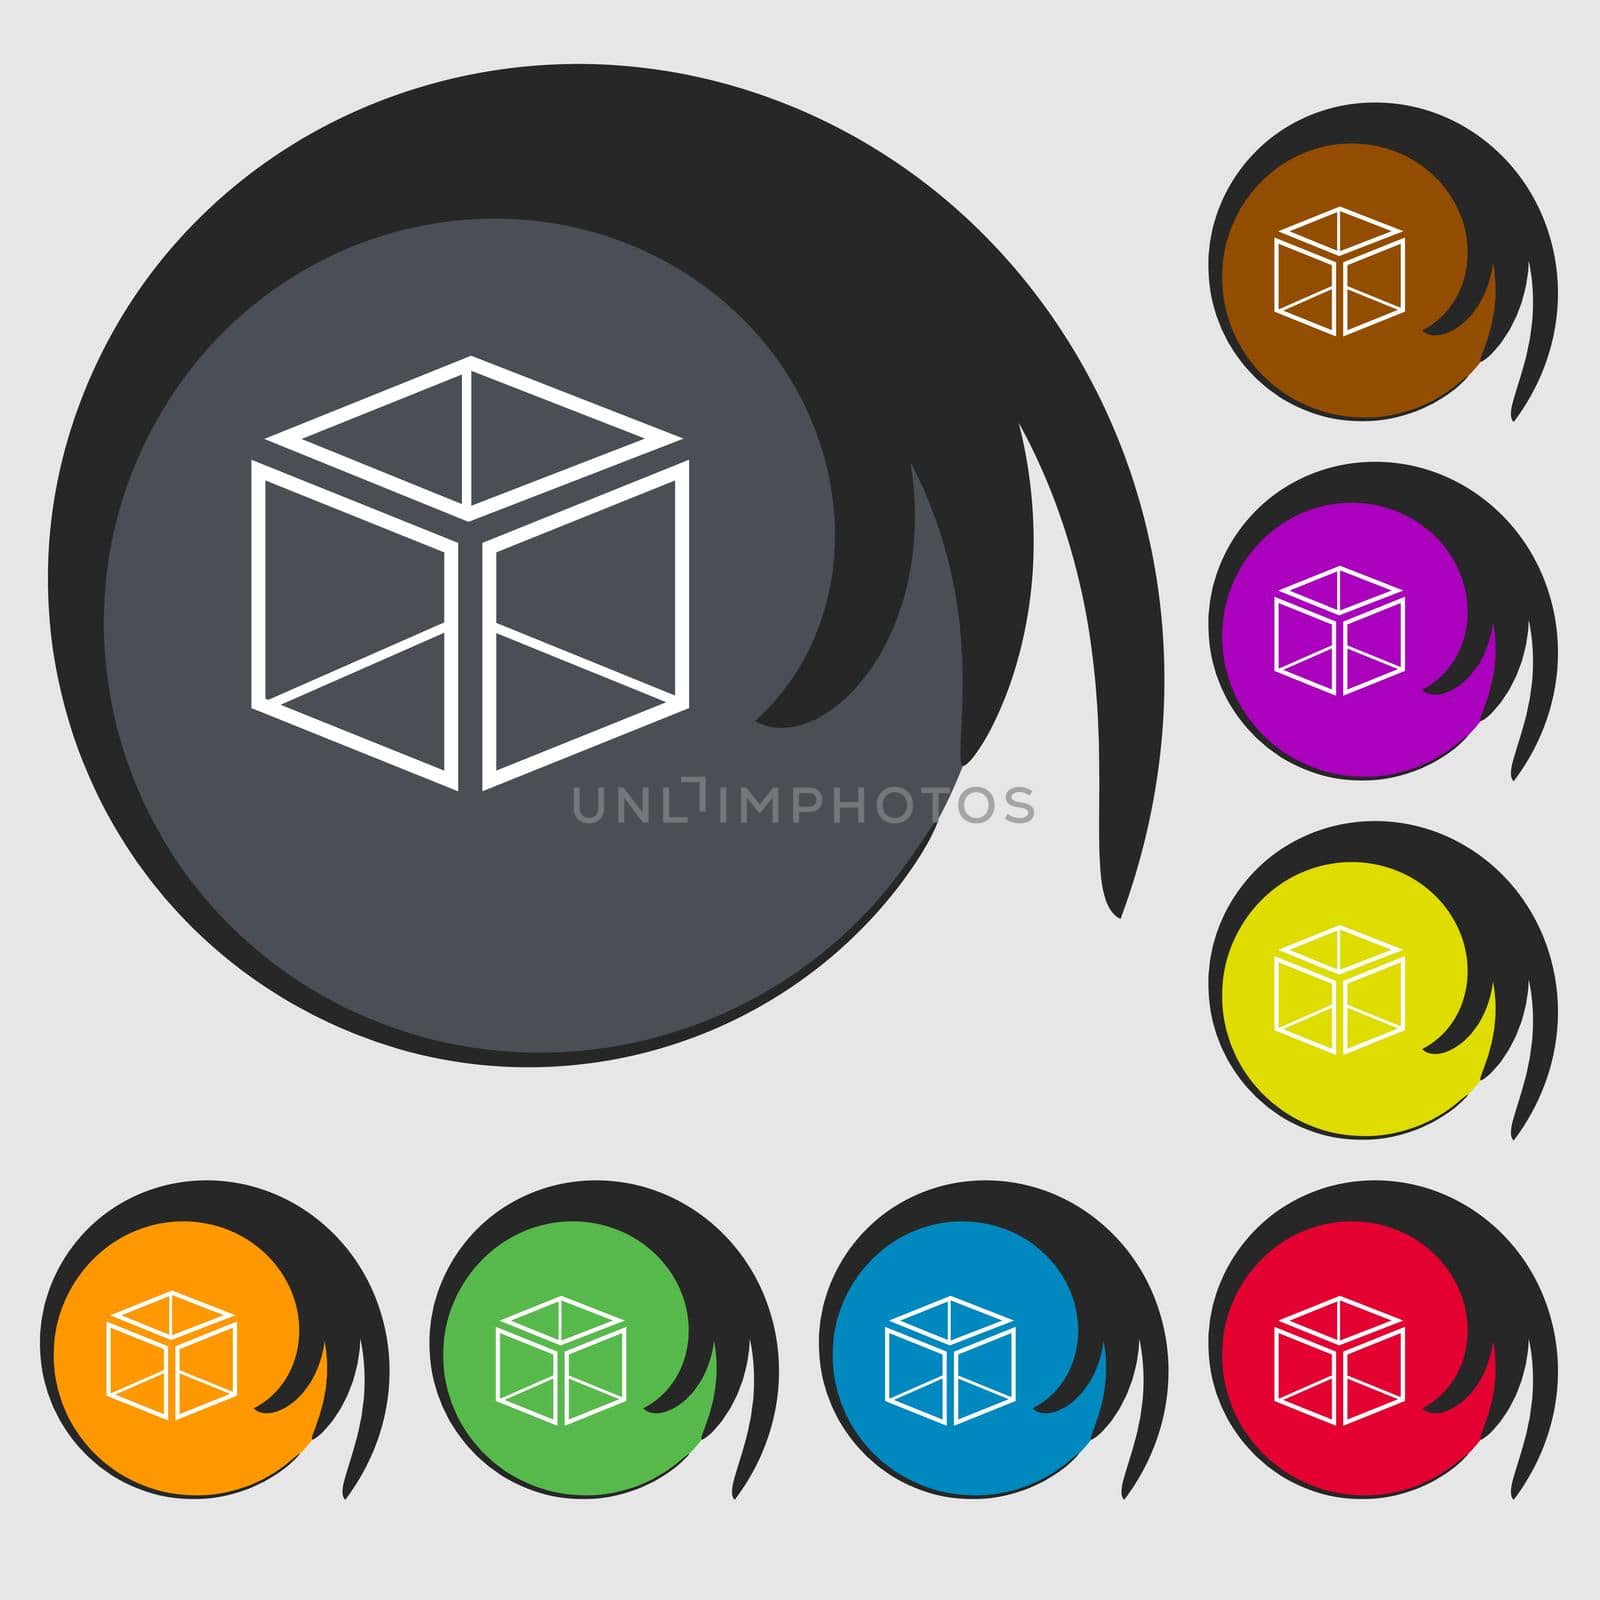 3d cube icon sign. Symbols on eight colored buttons. illustration